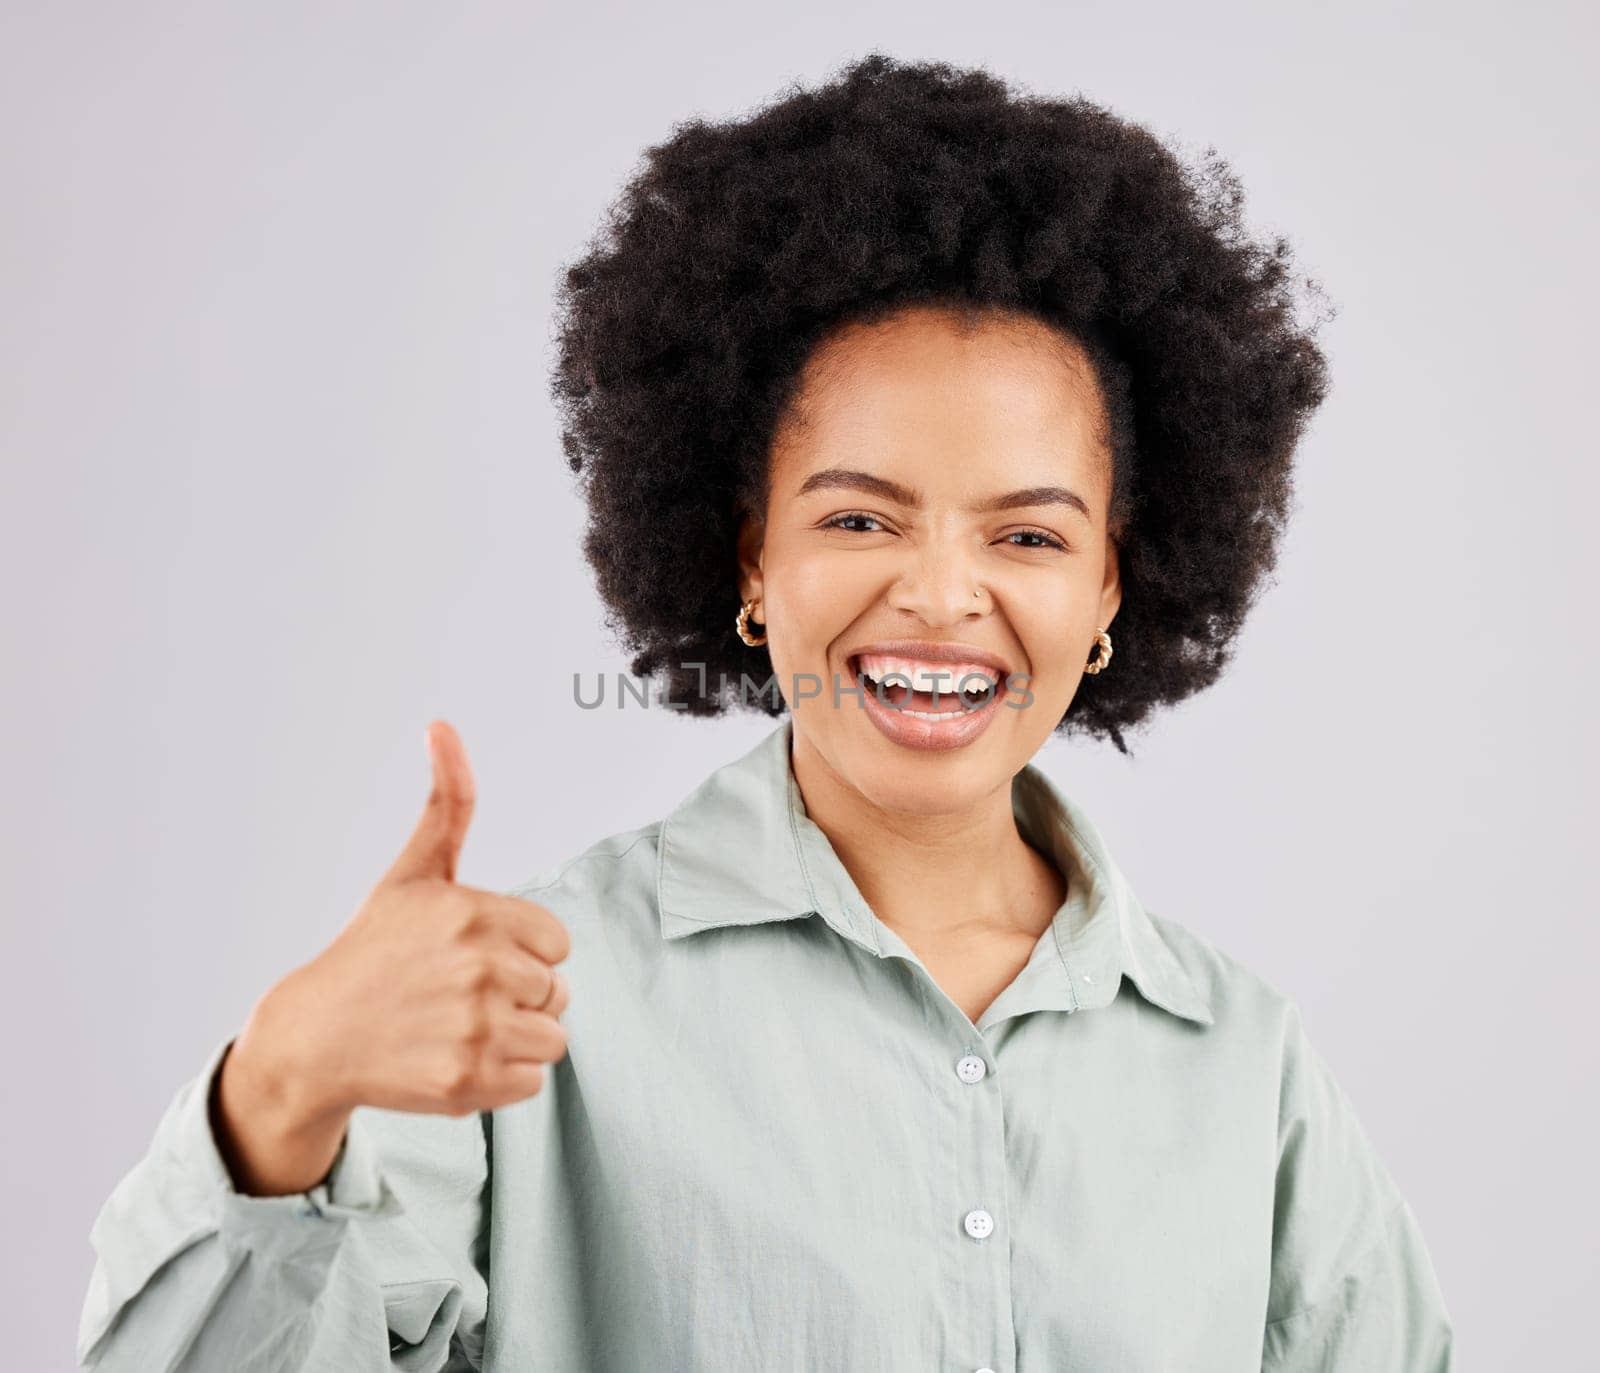 Portrait, thumbs up and black woman laughing in studio isolated on a white background. Success, happiness and person with hand gesture or emoji for winning, approval or agreement, like or thank you